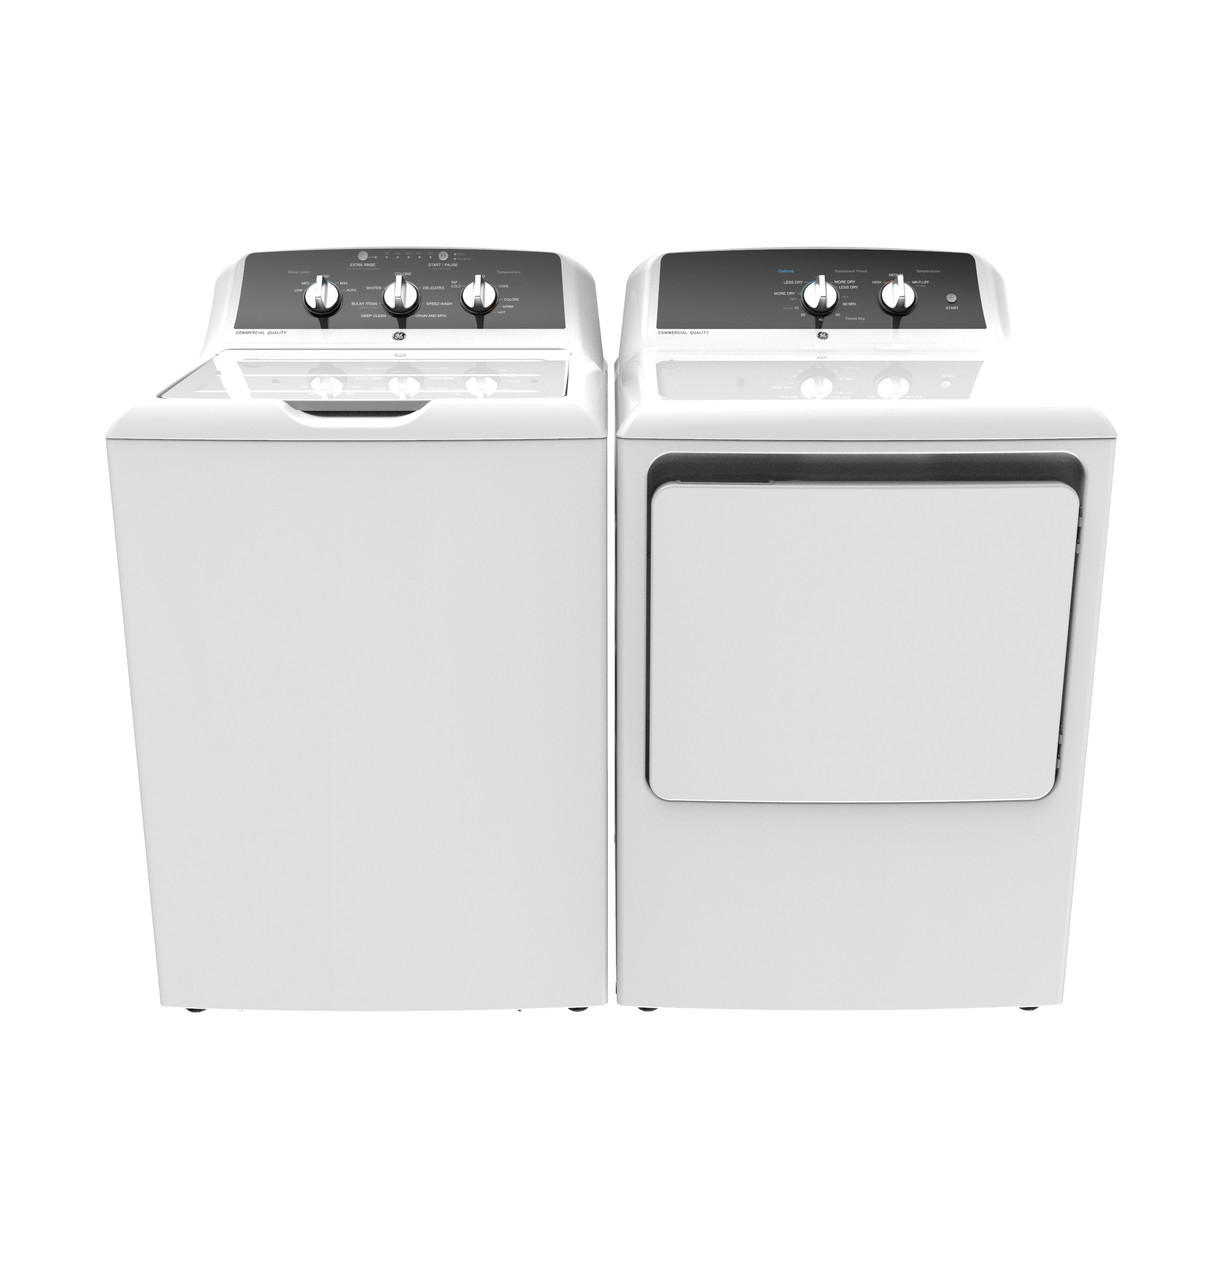 GE GTW525ACPWB Commercial Washer paired with dryer